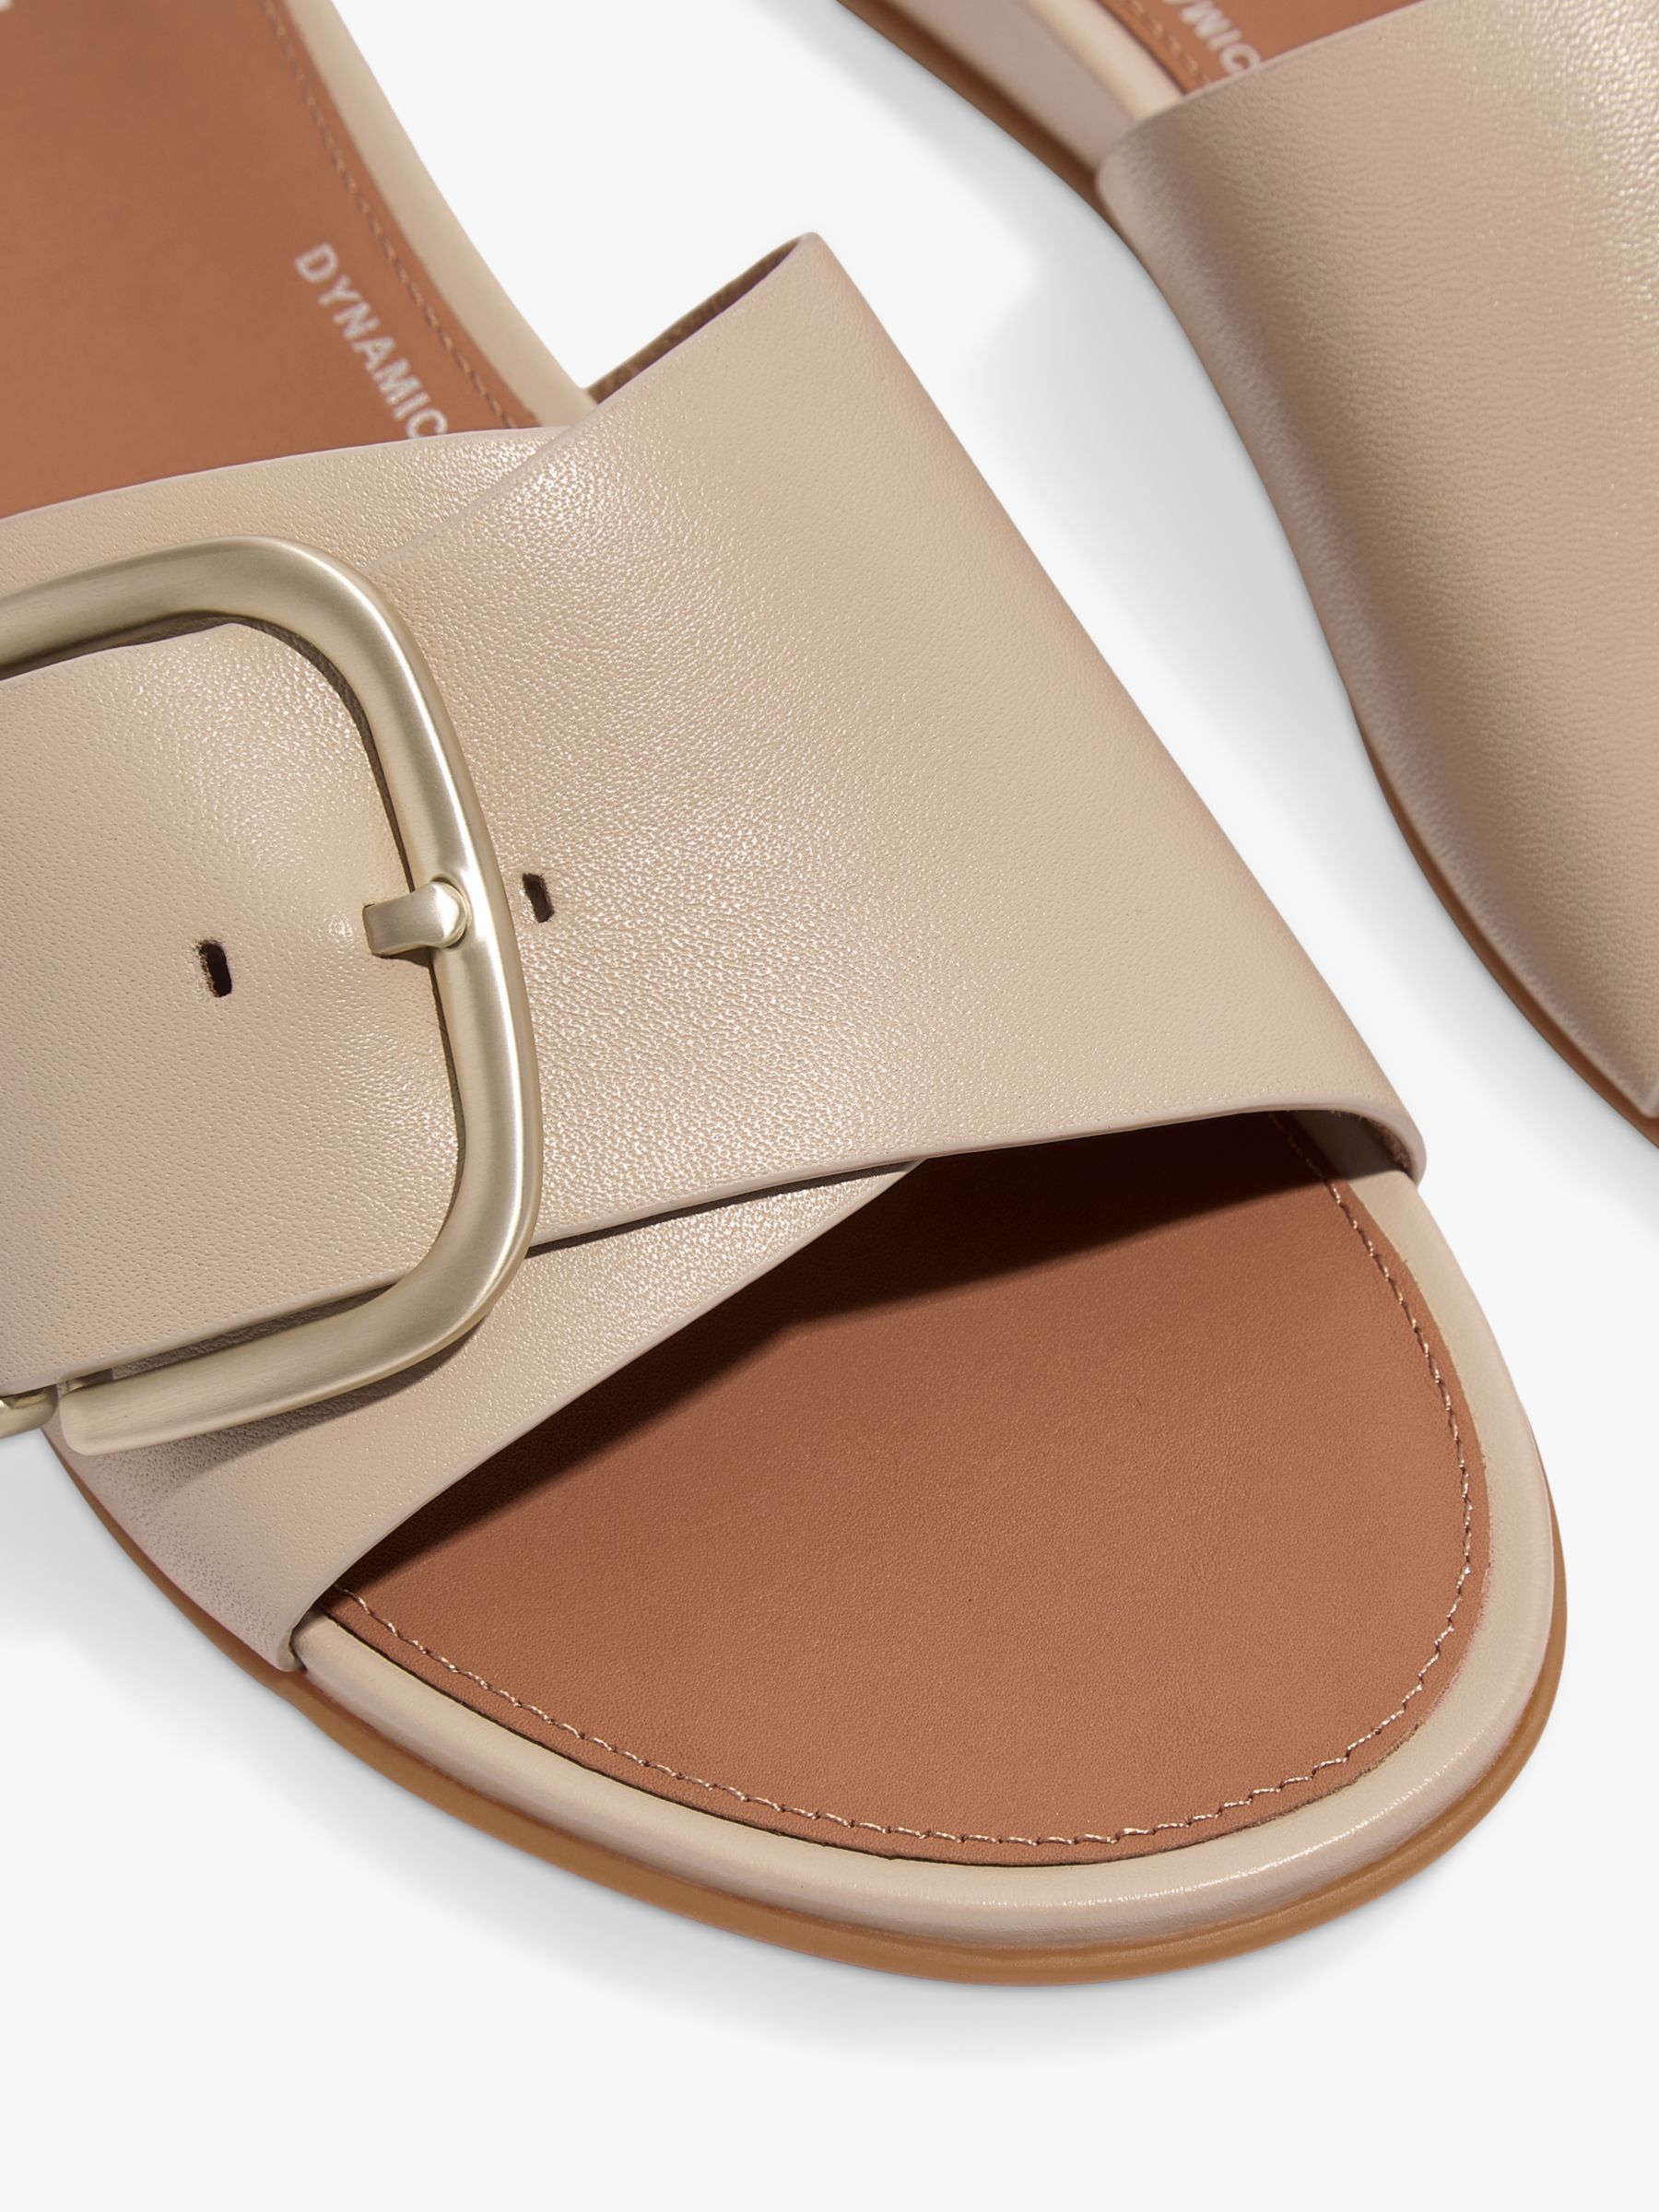 Buy FitFlop Gracie Buckle Pool Sandals, Stone Beige Online at johnlewis.com